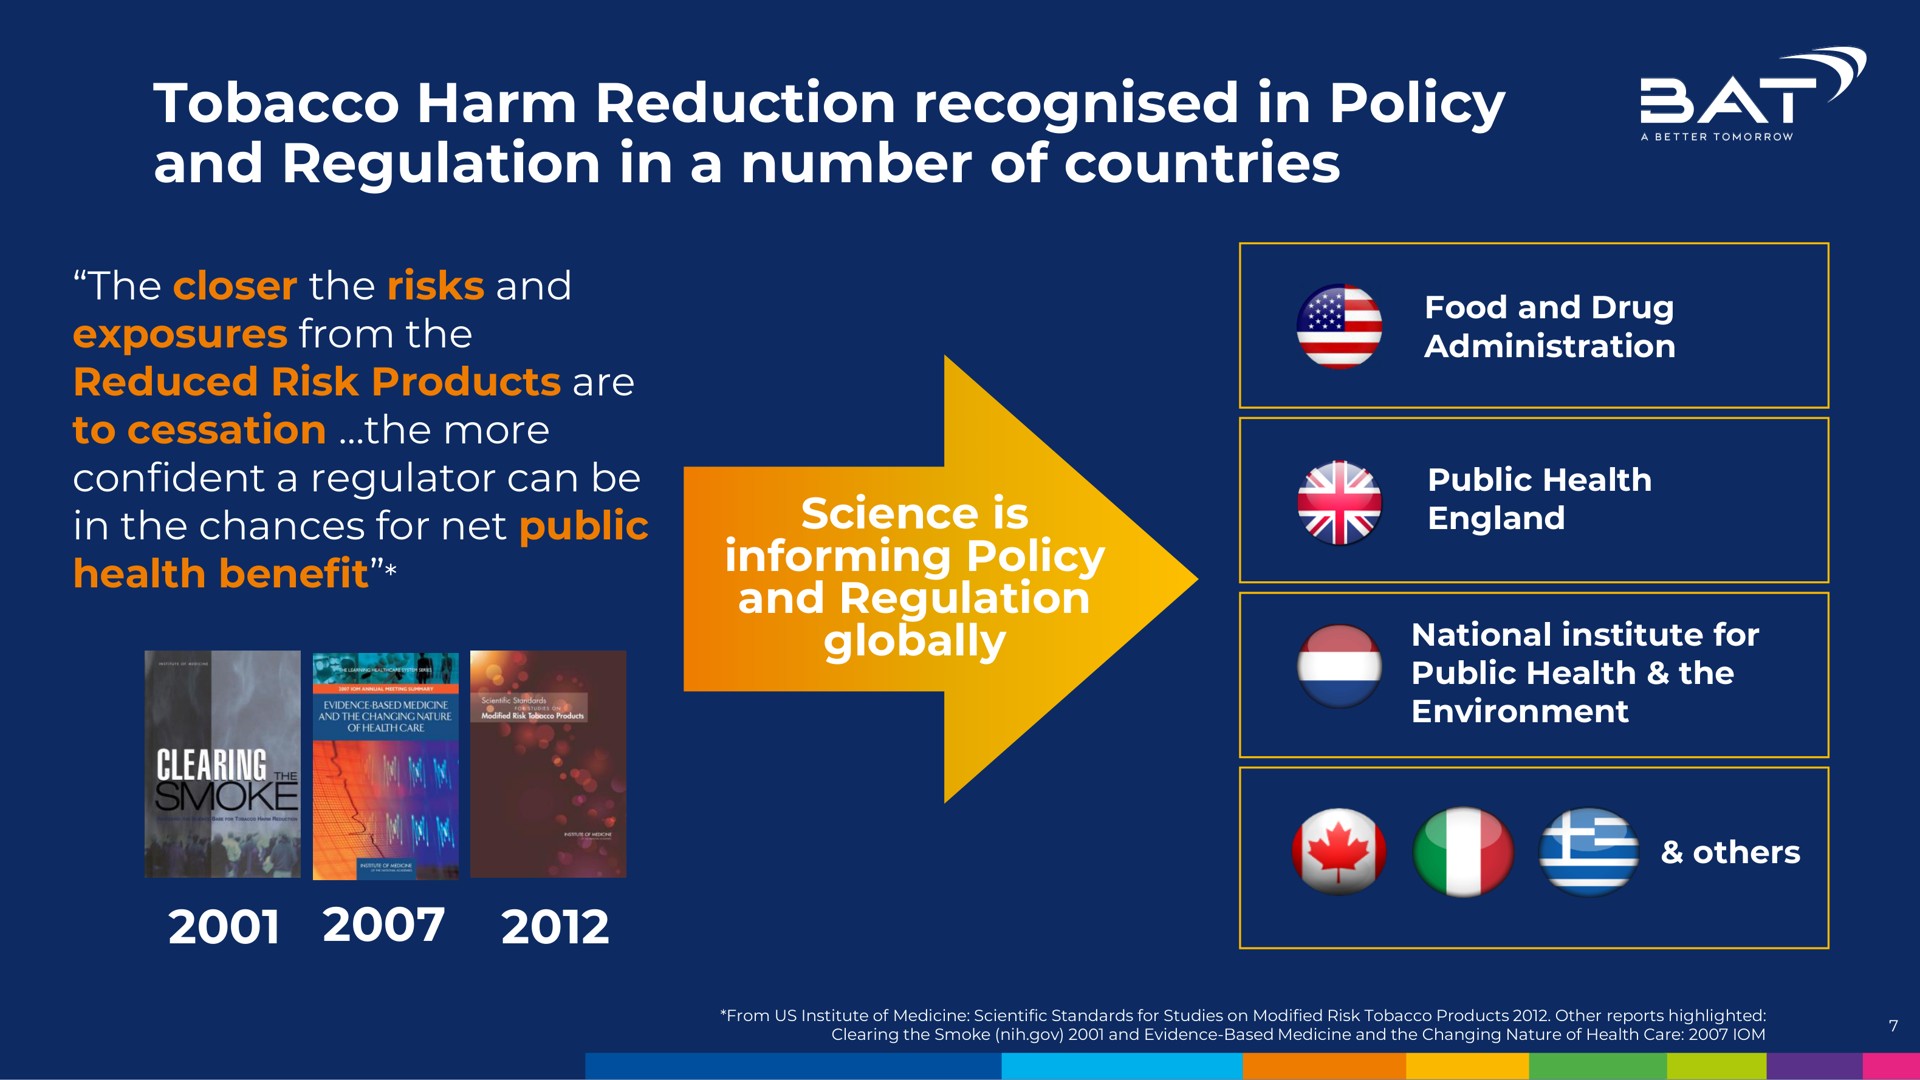 tobacco harm reduction in policy and regulation in a number of countries at cower | BAT